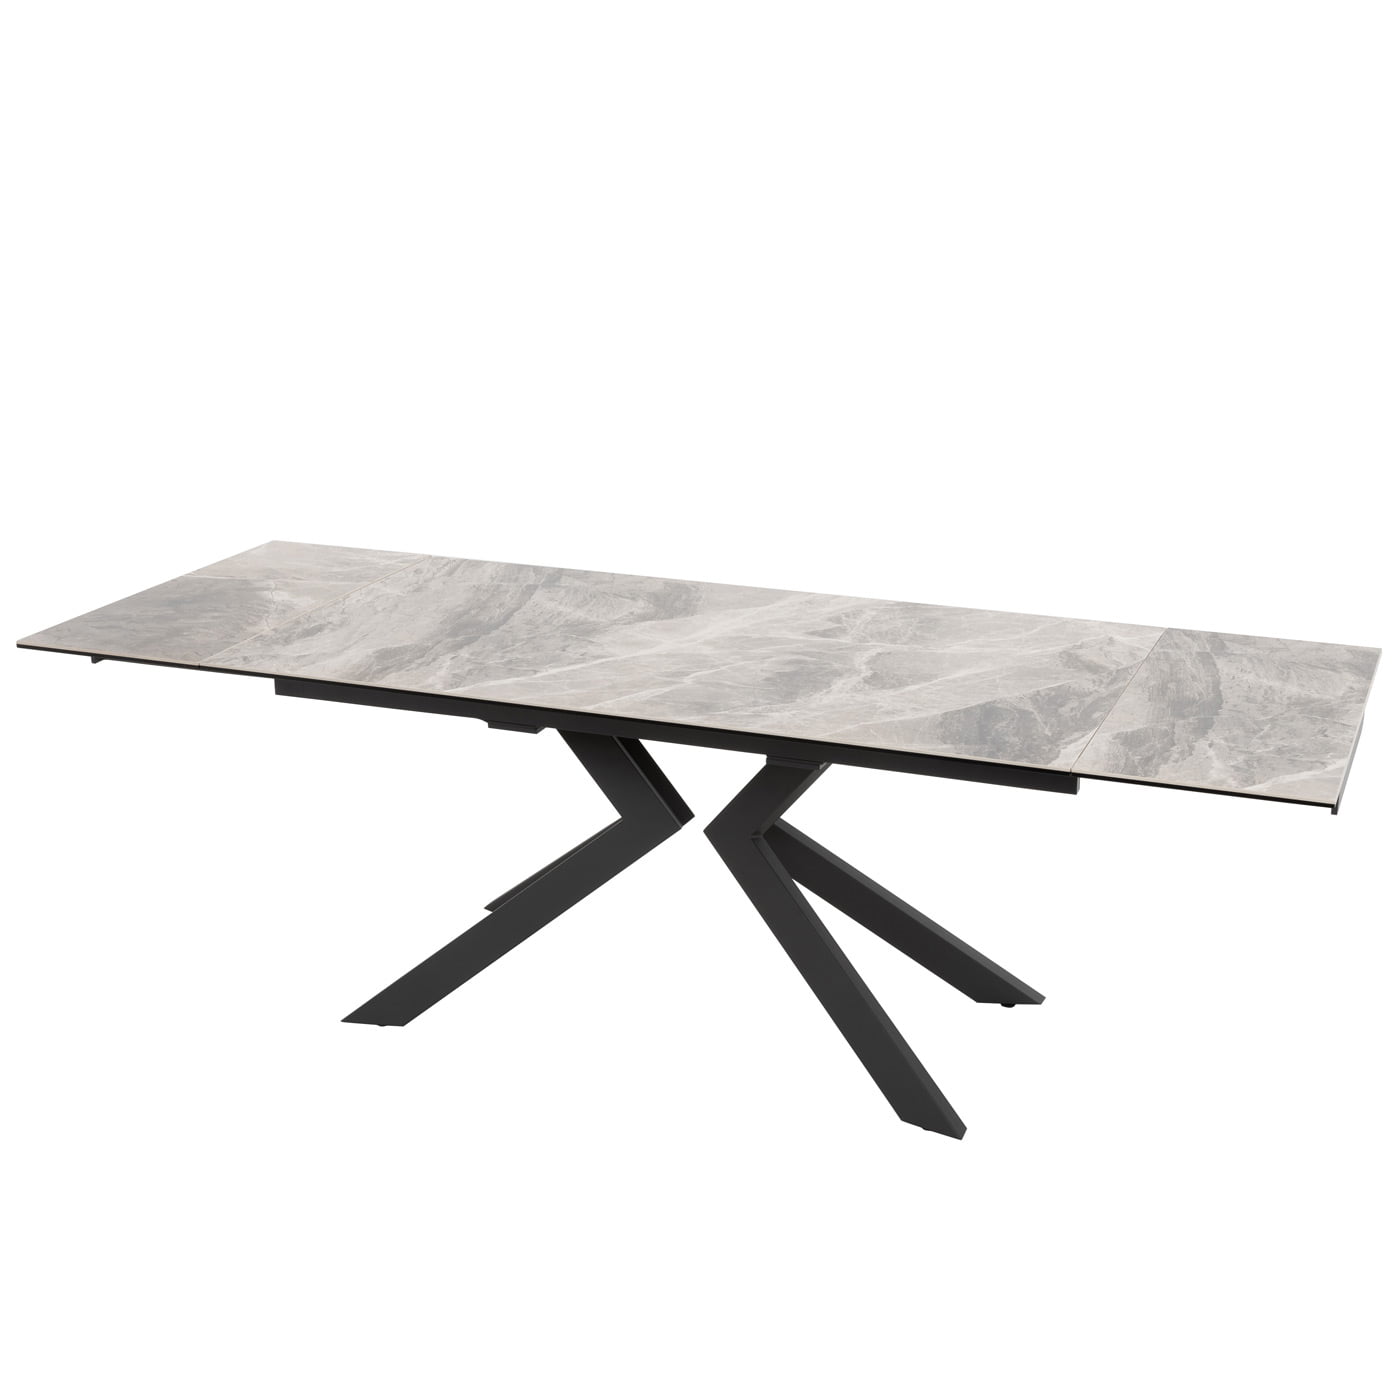 Ascoli Grey Marbled Ceramic extending dining table